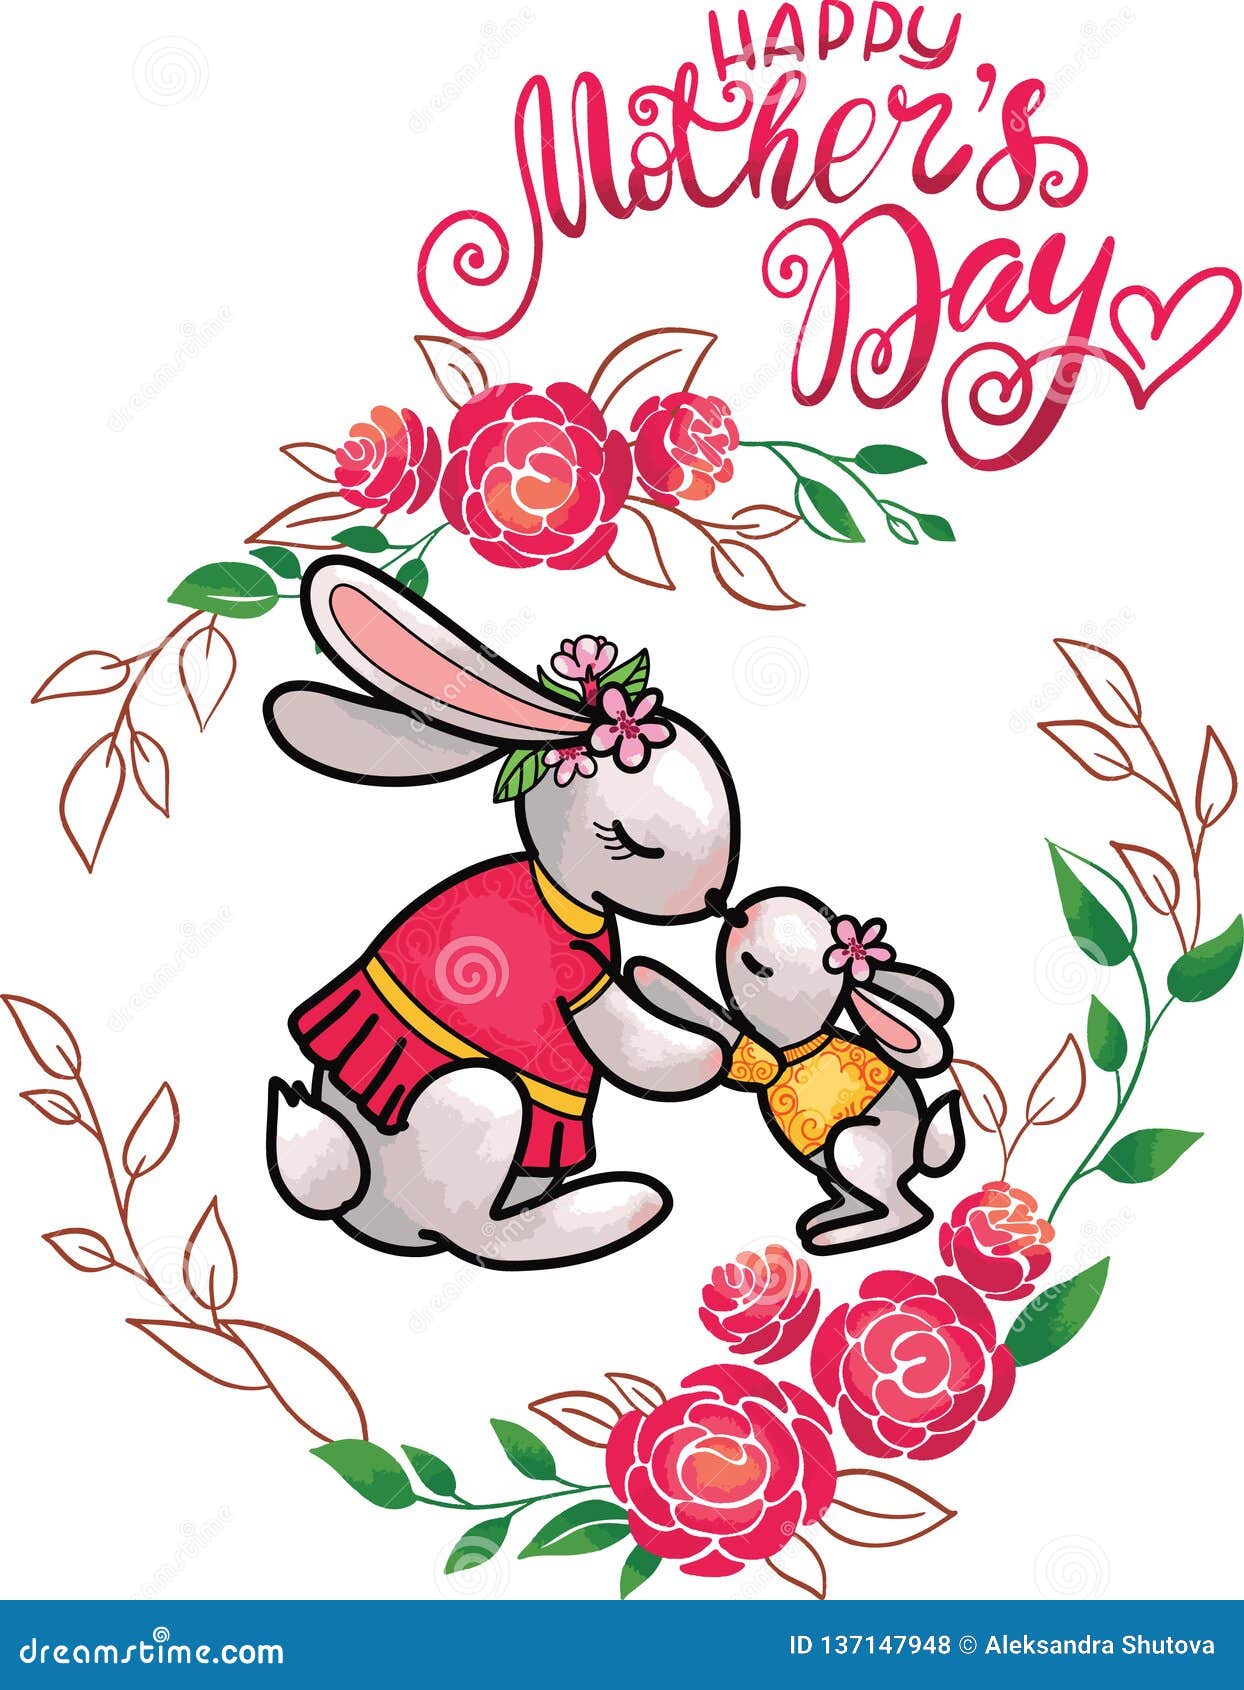 Happy Motherâ€™s Day. Greeting Card with the Image of Cute Rabbir Family  Stock Vector - Illustration of celebration, little: 137147948